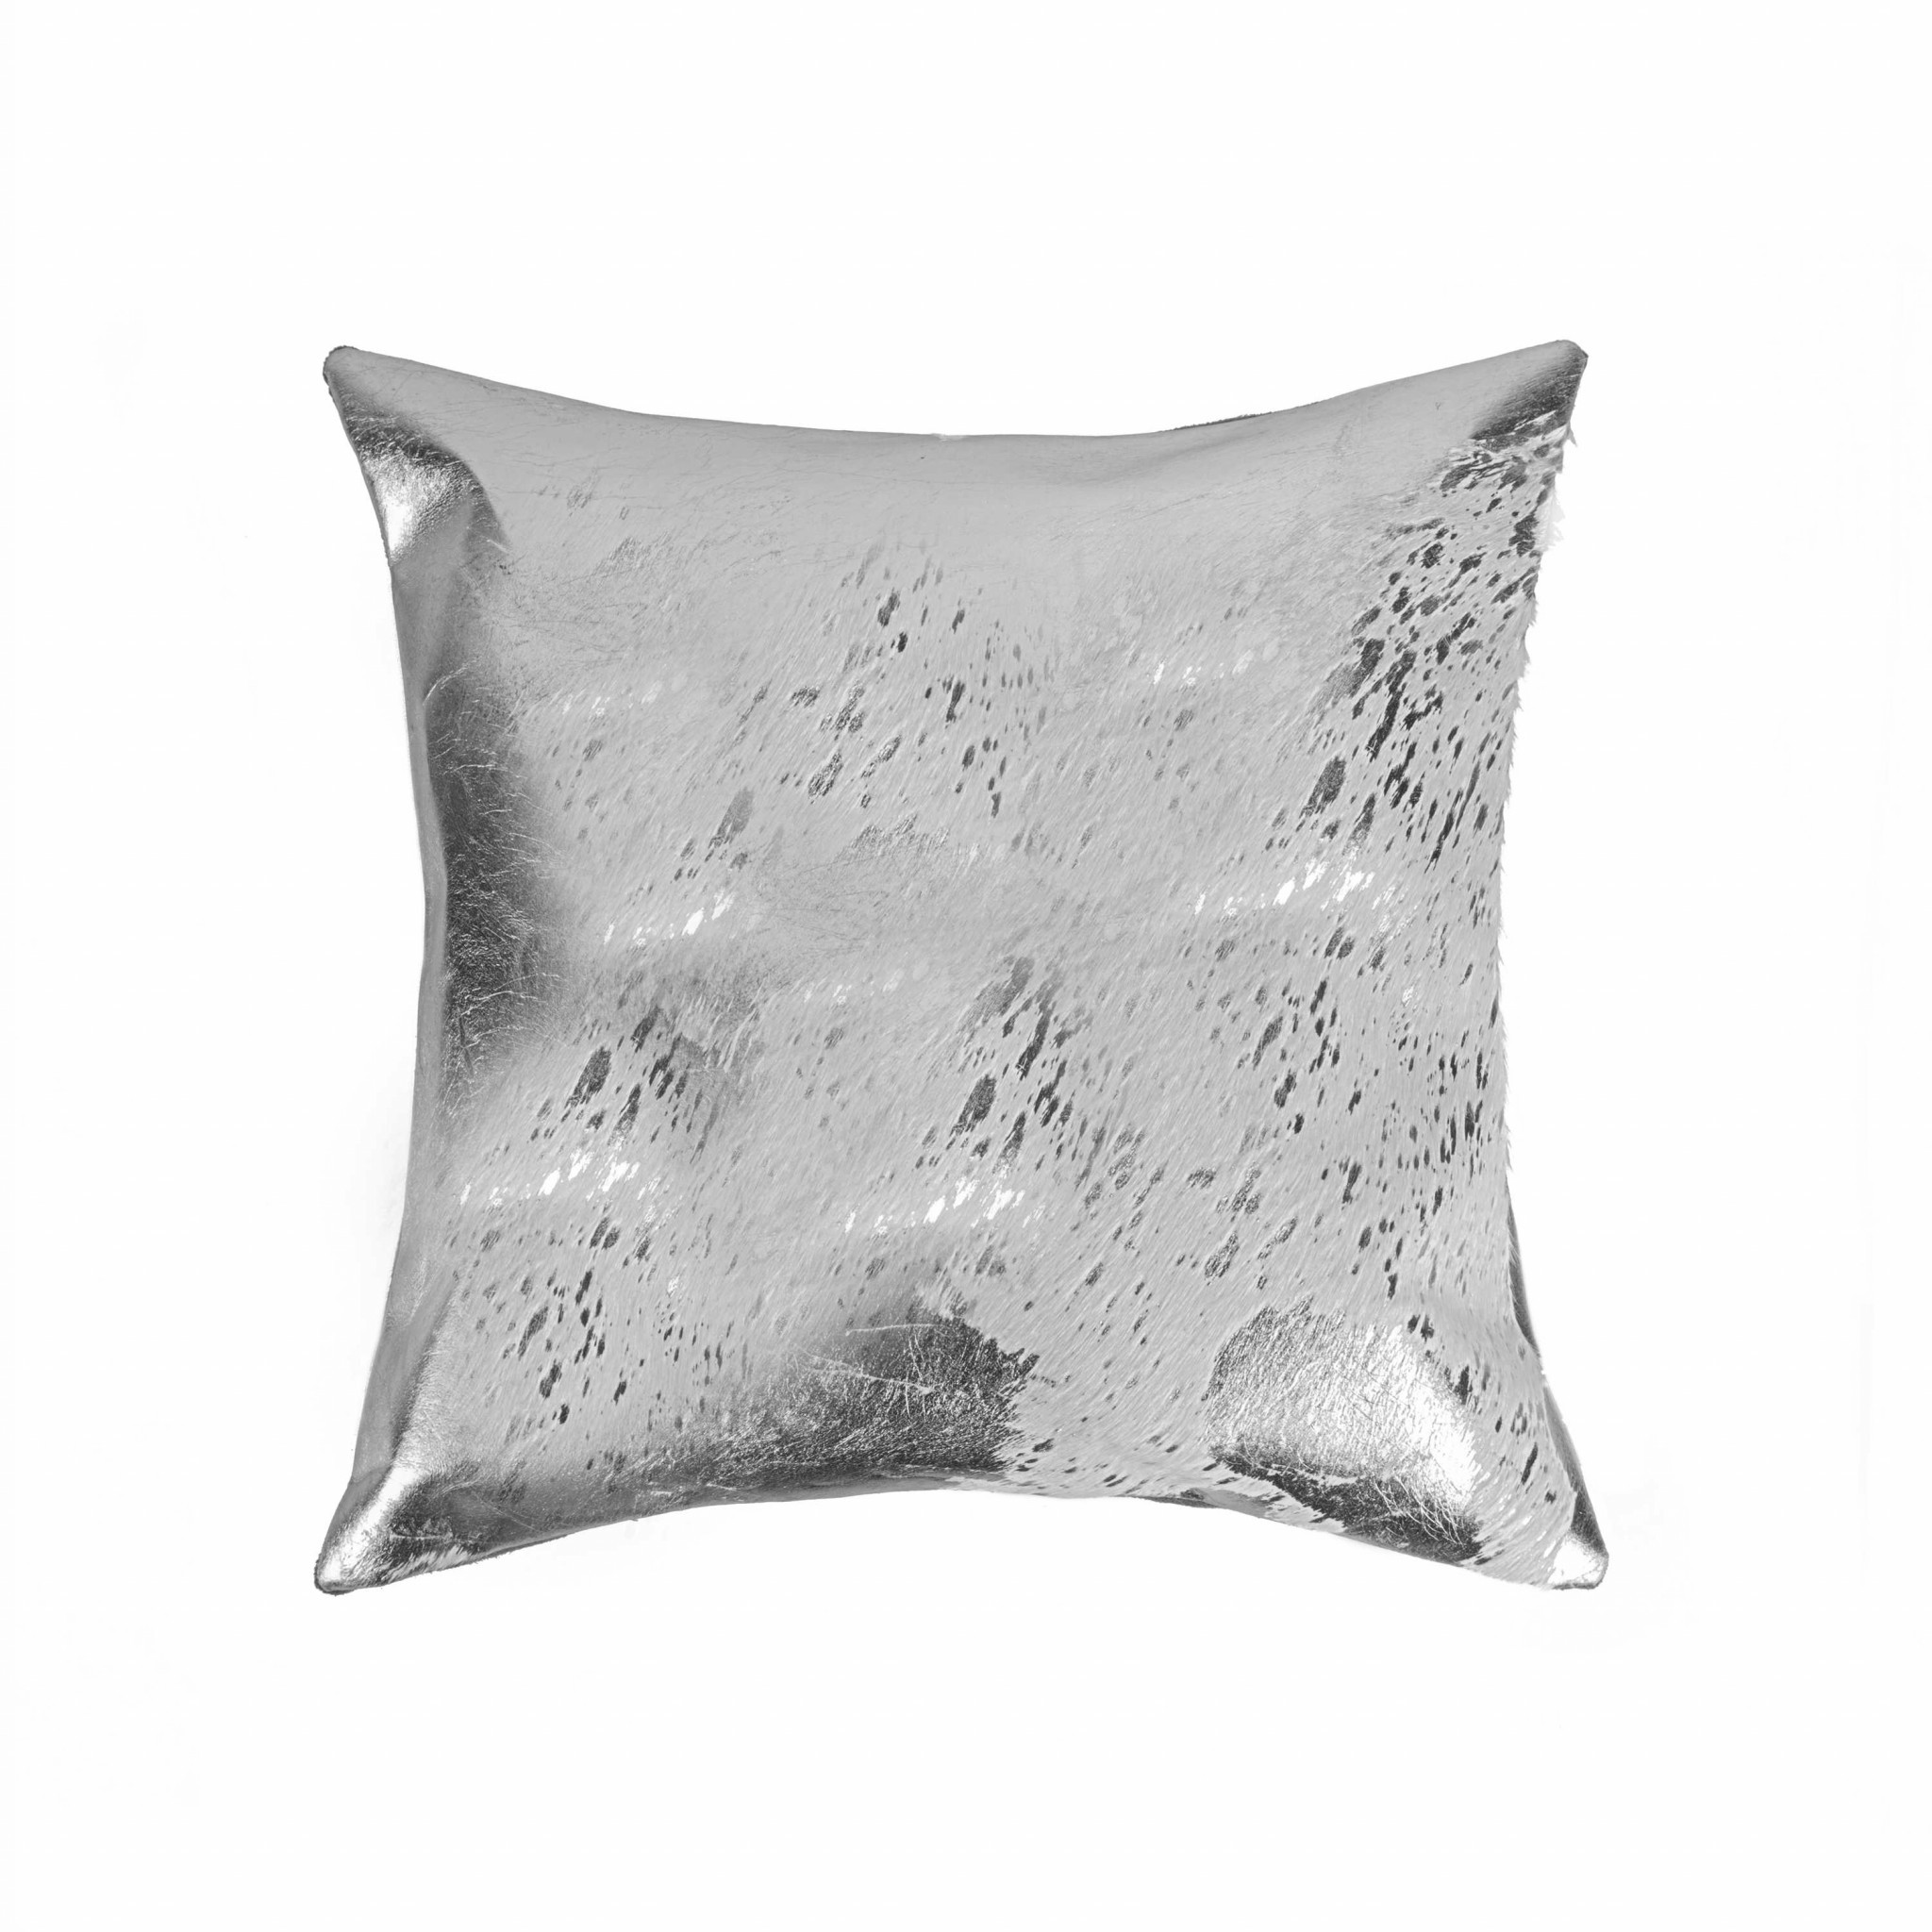 18" x 18" x 5" Gray And Silver Cowhide - Pillow